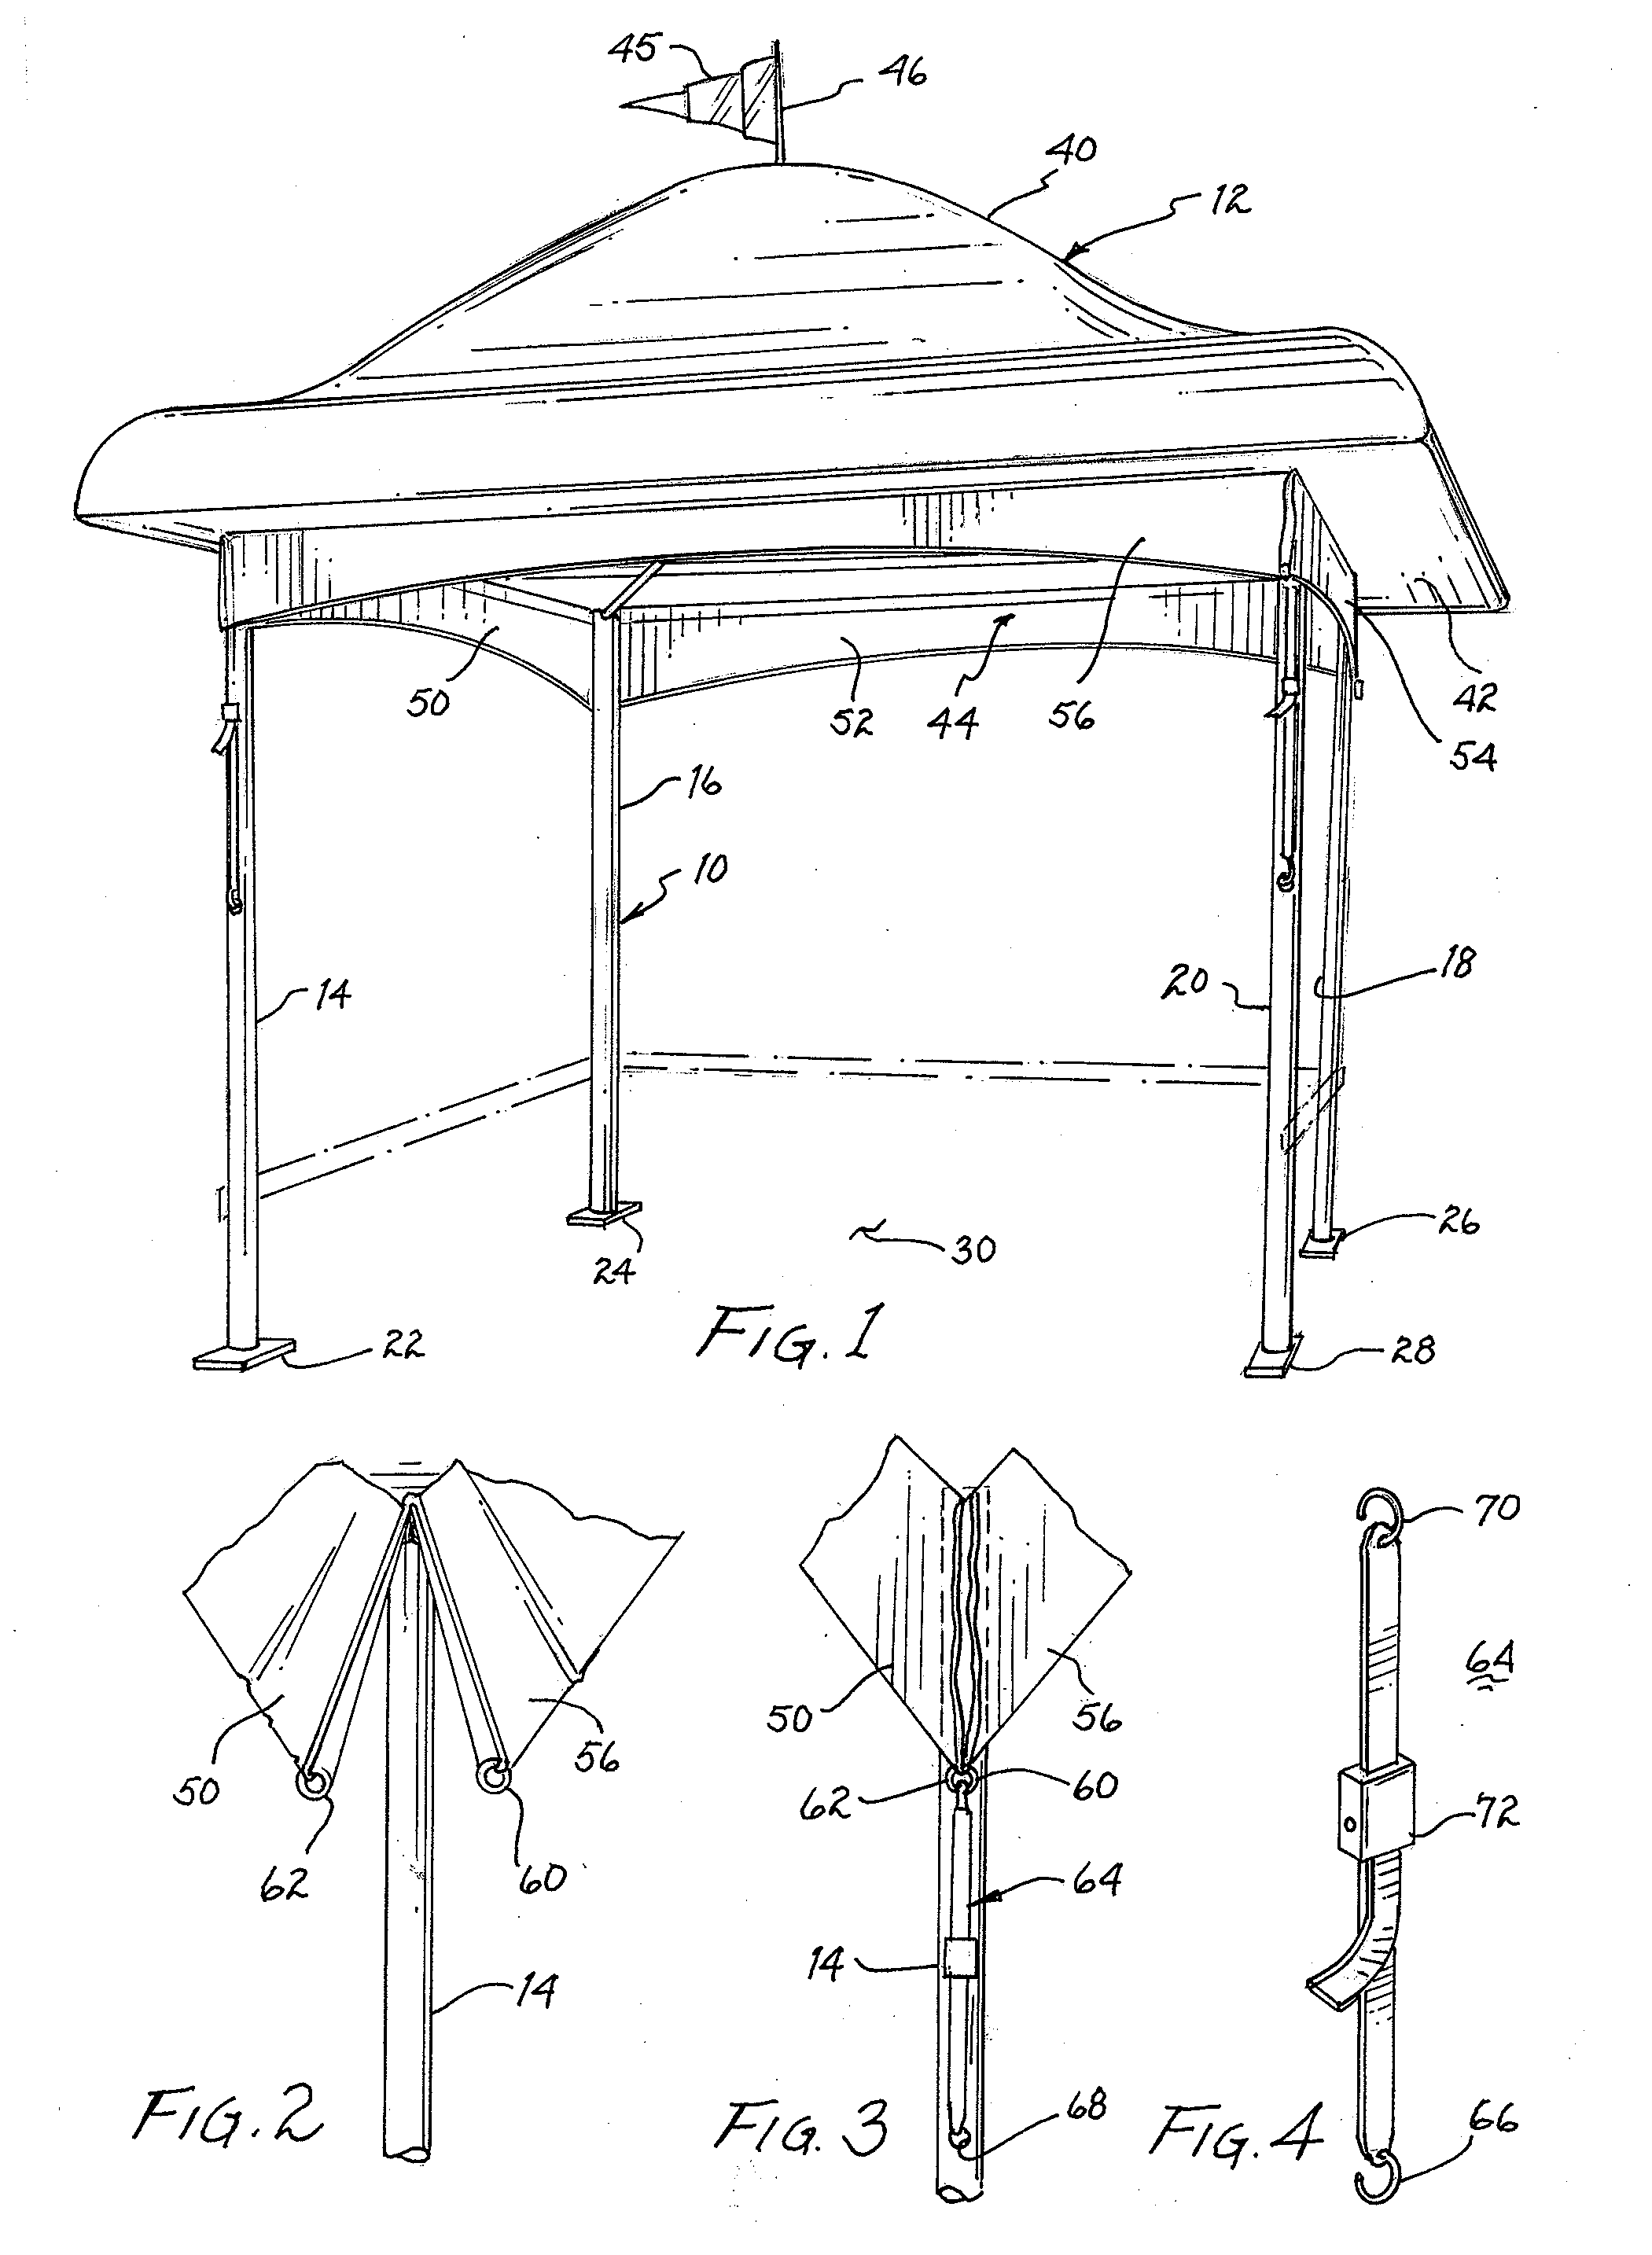 Booth with inflatable canopy